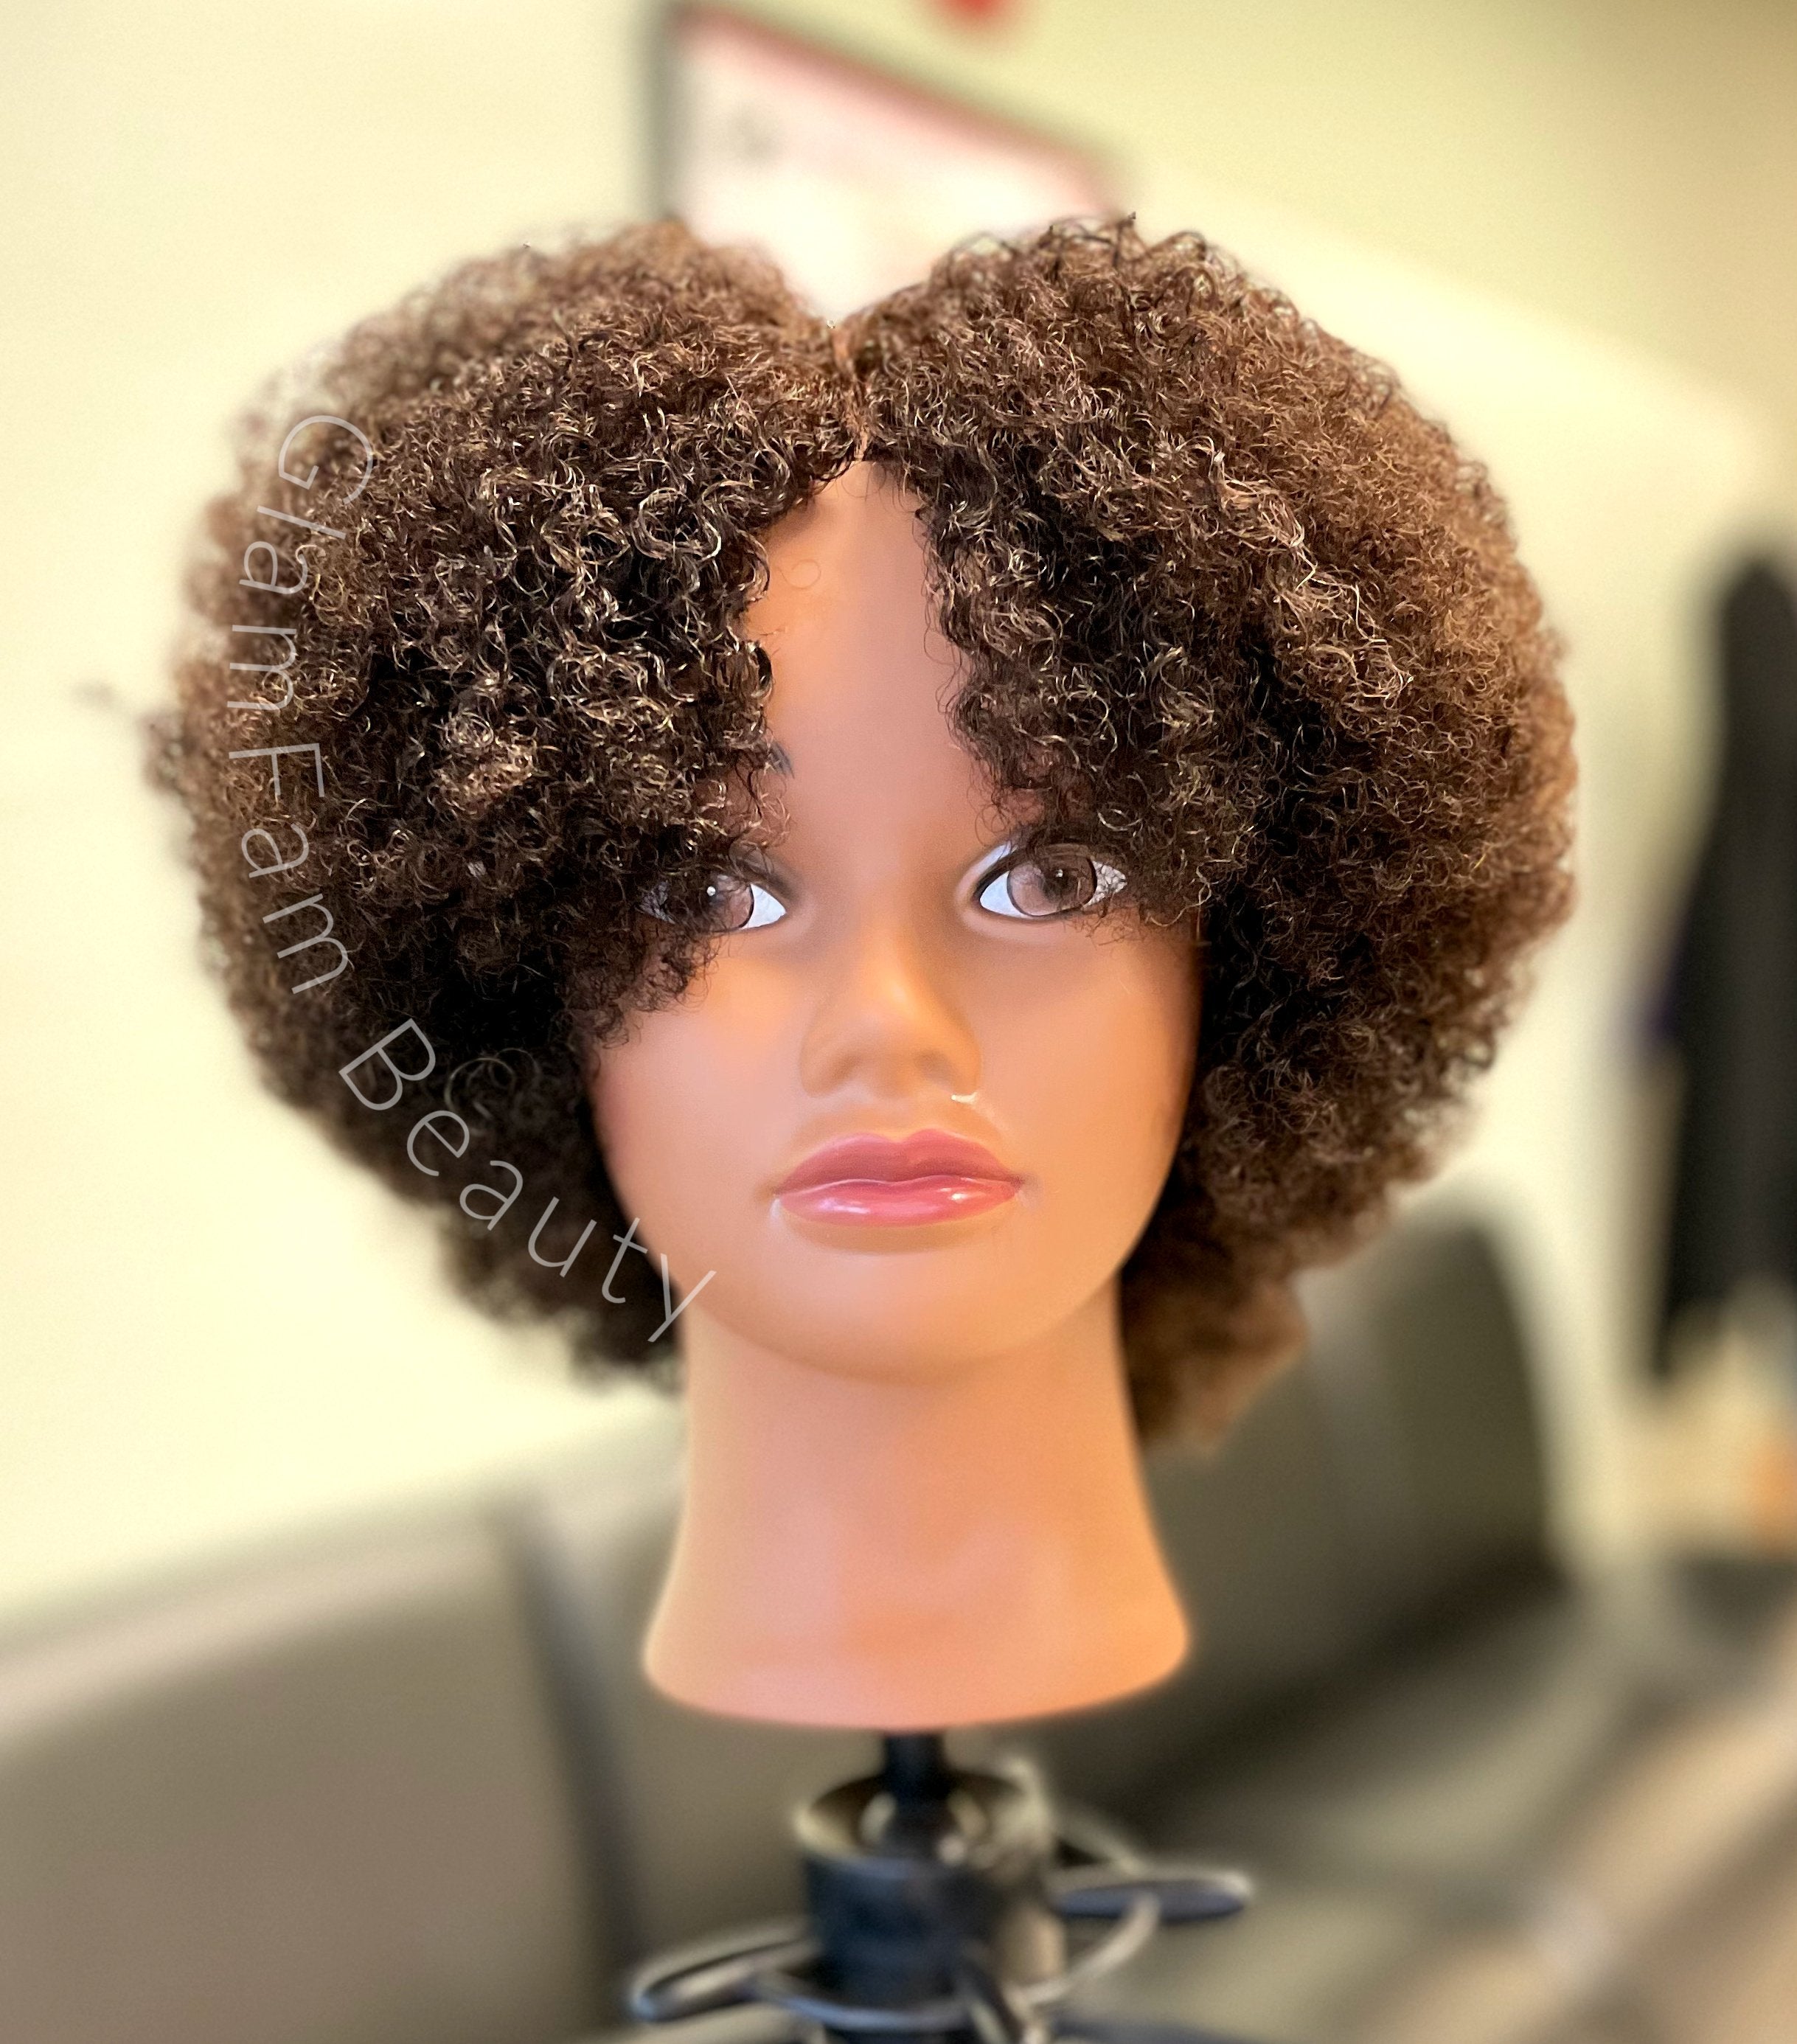 Mannequin Head Braiding Styling Doll Head with Hair 100% Natural